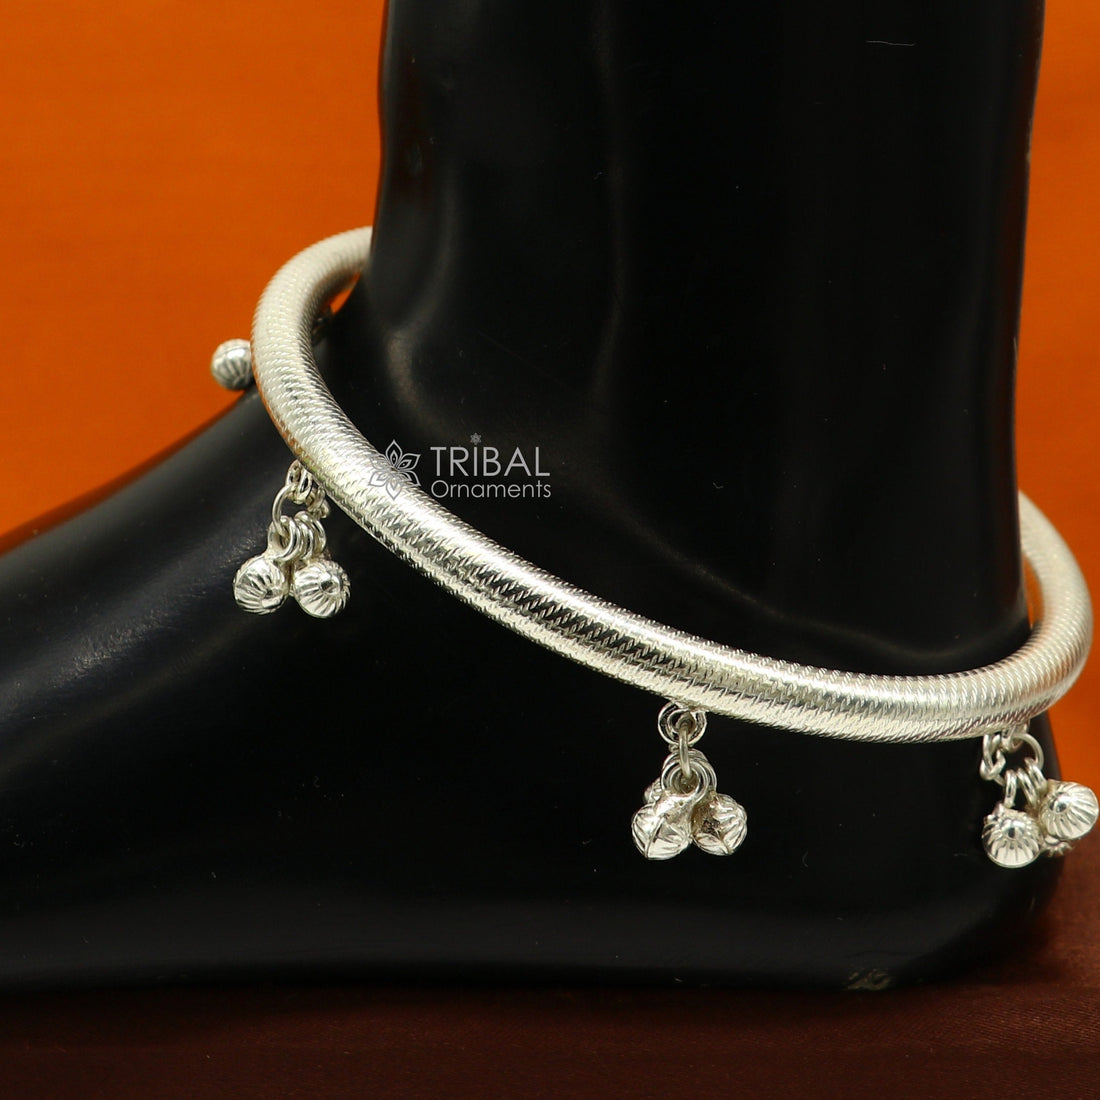 925 sterling silver ankle kada jewelry, best ankle bracelet feet jewelry, unique cultural functional brides anklet jewelry nsfk95 - TRIBAL ORNAMENTS